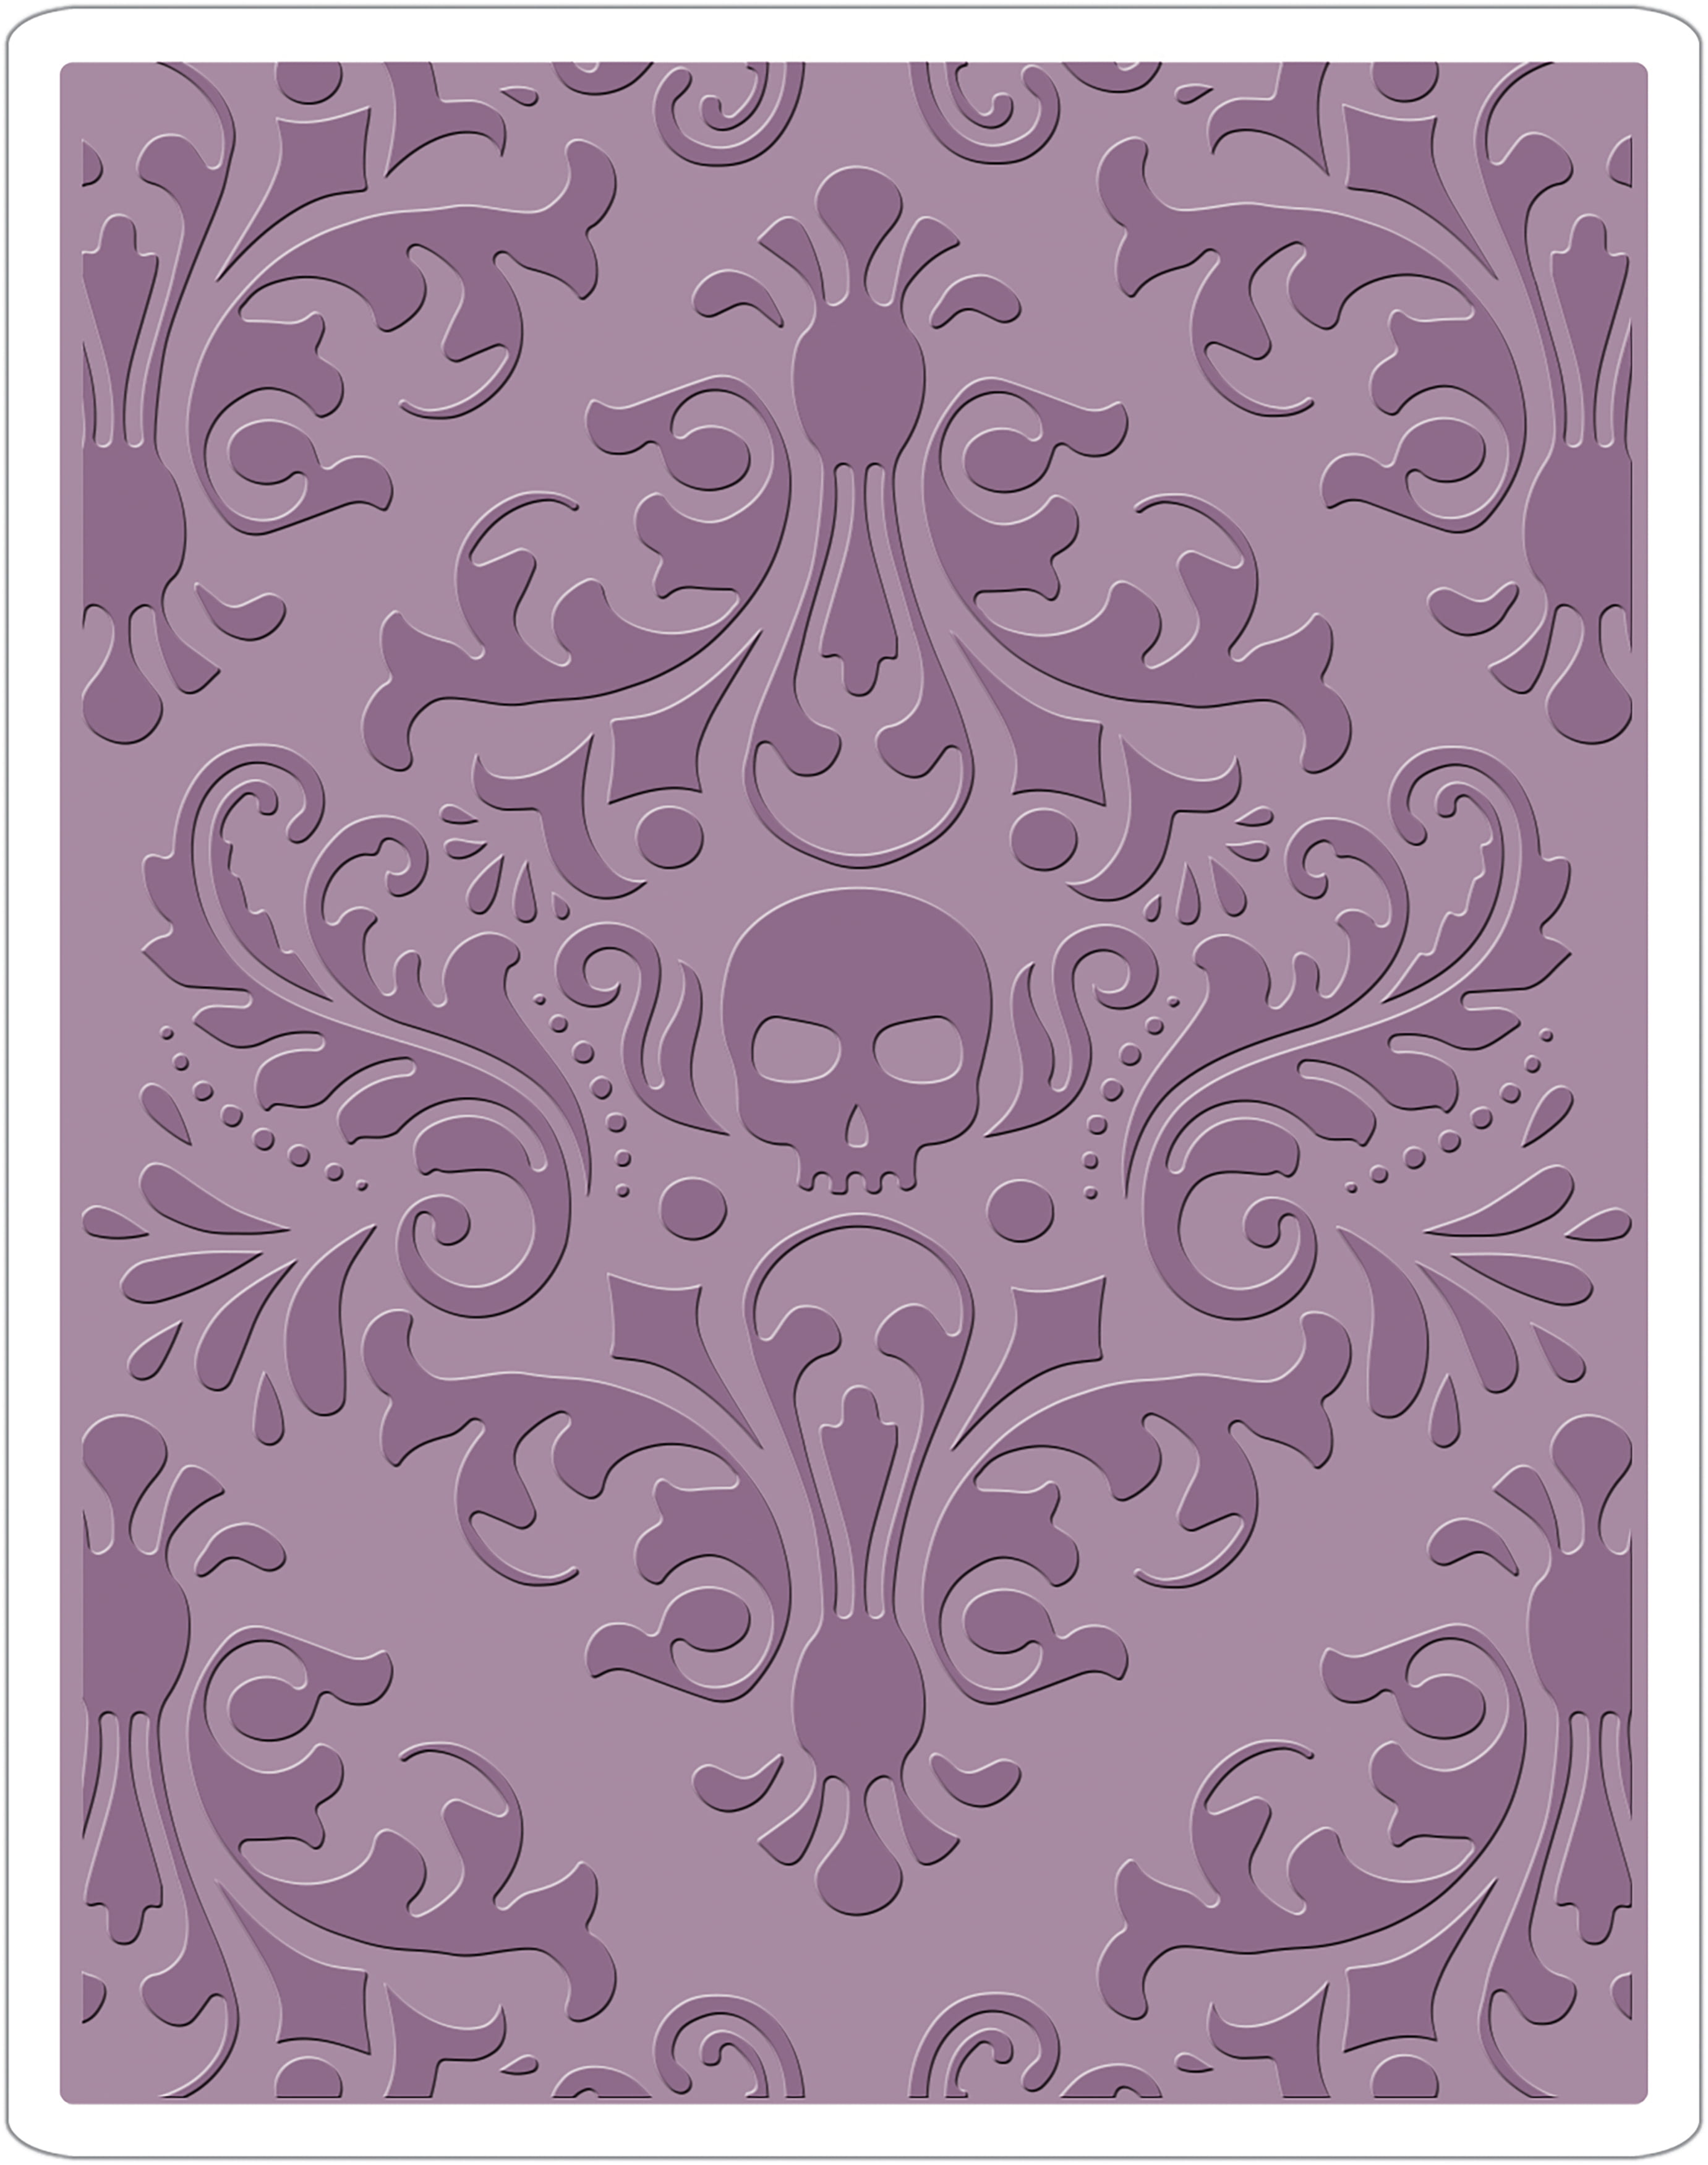 Sizzix Texture Fades Embossing Folder-Skull Damask by Tim Holtz Multi-Colour 17.5 x 12.4 x 0.5 cm 